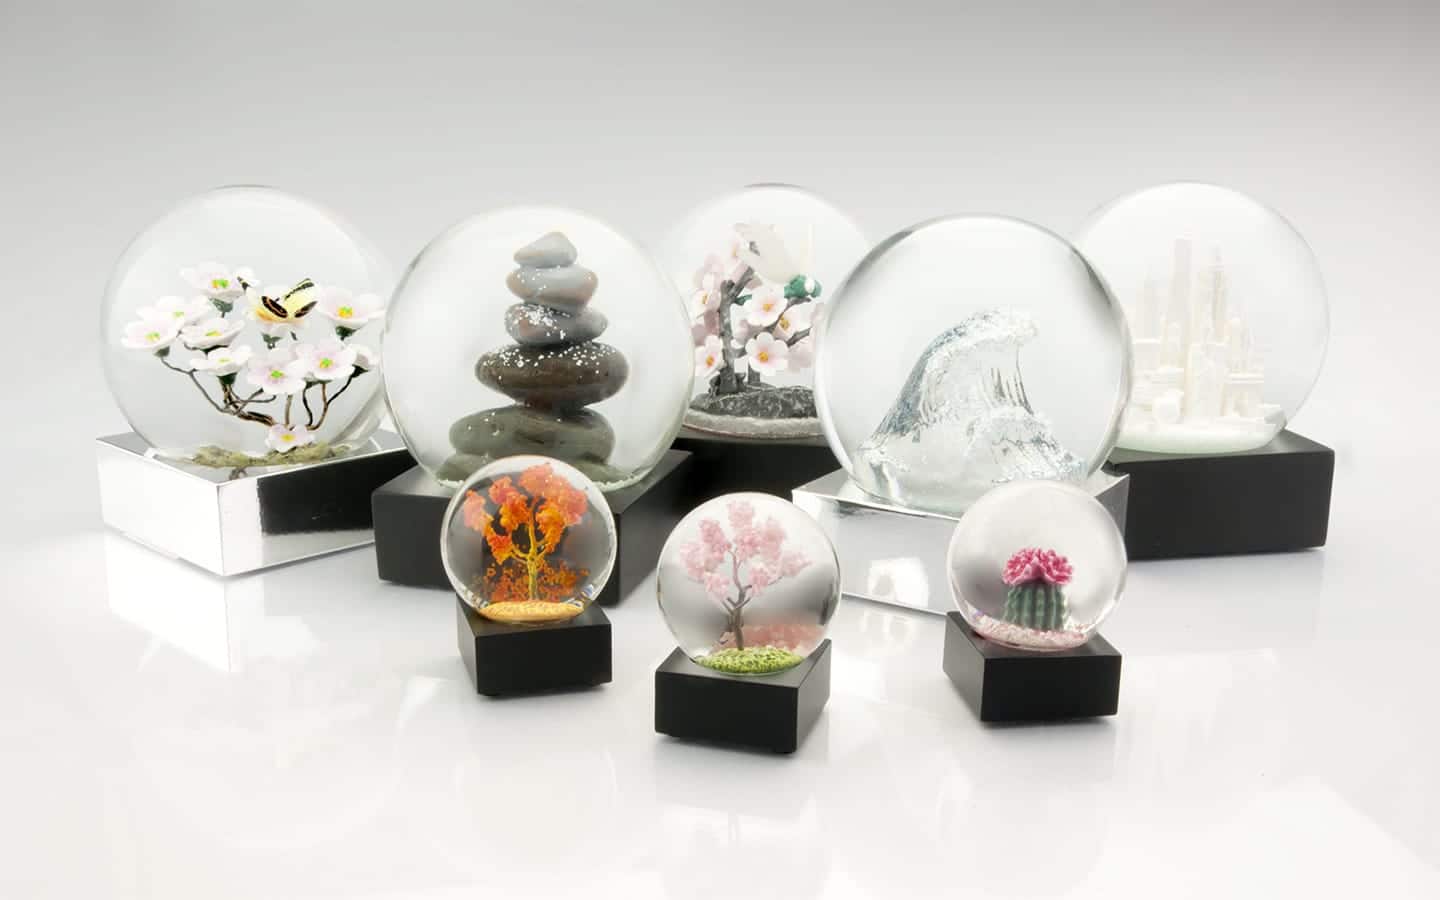 Snow Globes Make A Special Gift